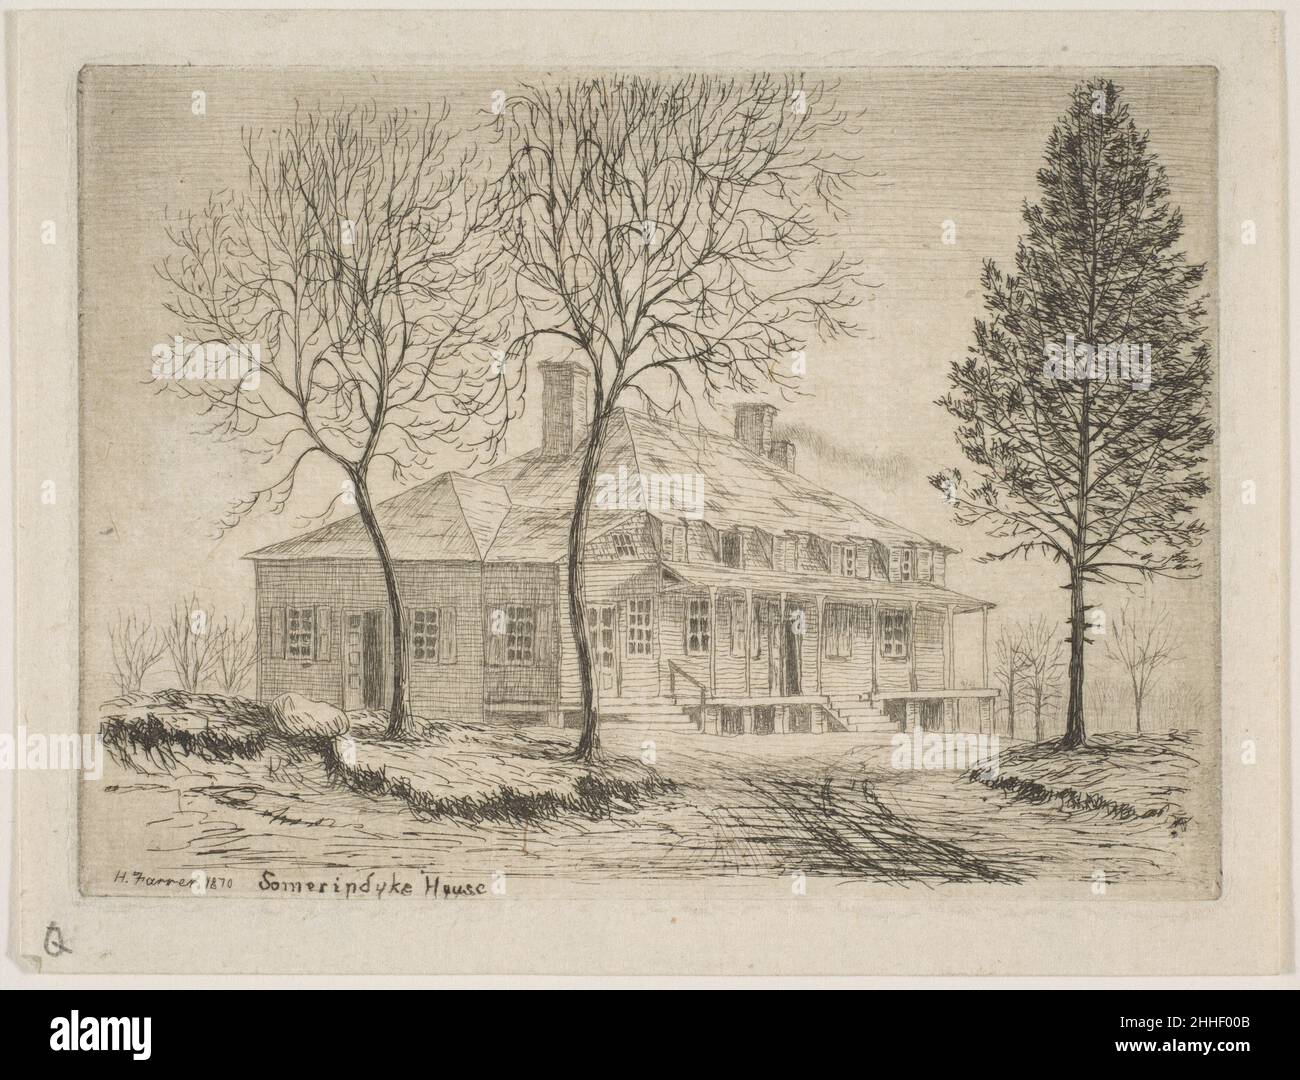 Somerindyck House, Bloomingdale Road (from Scenes of Old New York) 1870 Henry Farrer American. Somerindyck House, Bloomingdale Road (from Scenes of Old New York)  380986 Artist: Henry Farrer, American, London 1844?1903 New York, Somerindyck House, Bloomingdale Road (from Scenes of Old New York), 1870, Etching, plate: 3 1/16 x 4 3/16 in. (7.8 x 10.7 cm) sheet: 3 9/16 x 4 5/8 in. (9.1 x 11.8 cm). The Metropolitan Museum of Art, New York. The Edward W. C. Arnold Collection of New York Prints, Maps and Pictures, Bequest of Edward W. C. Arnold, 1954 (54.90.924) Stock Photo